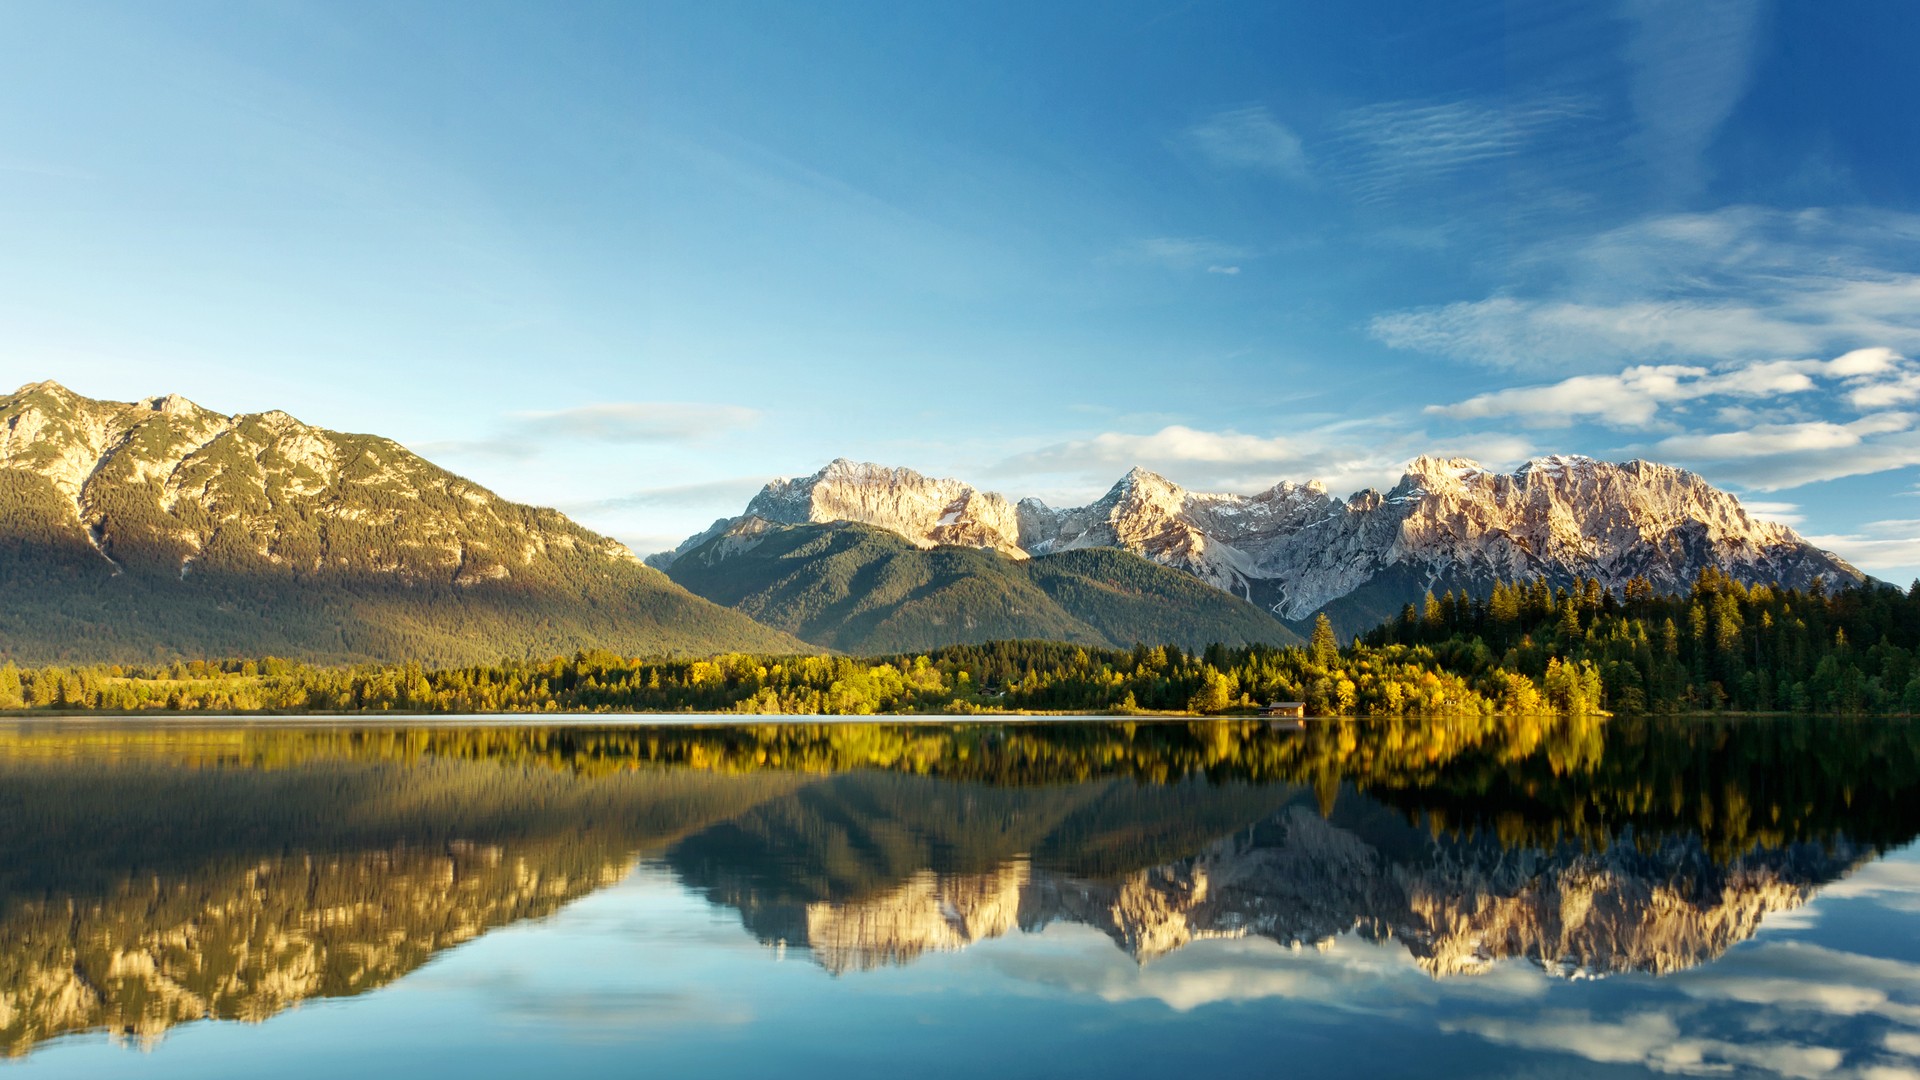 General 1920x1080 landscape nature mountains lake forest reflection clouds sky calm calm waters